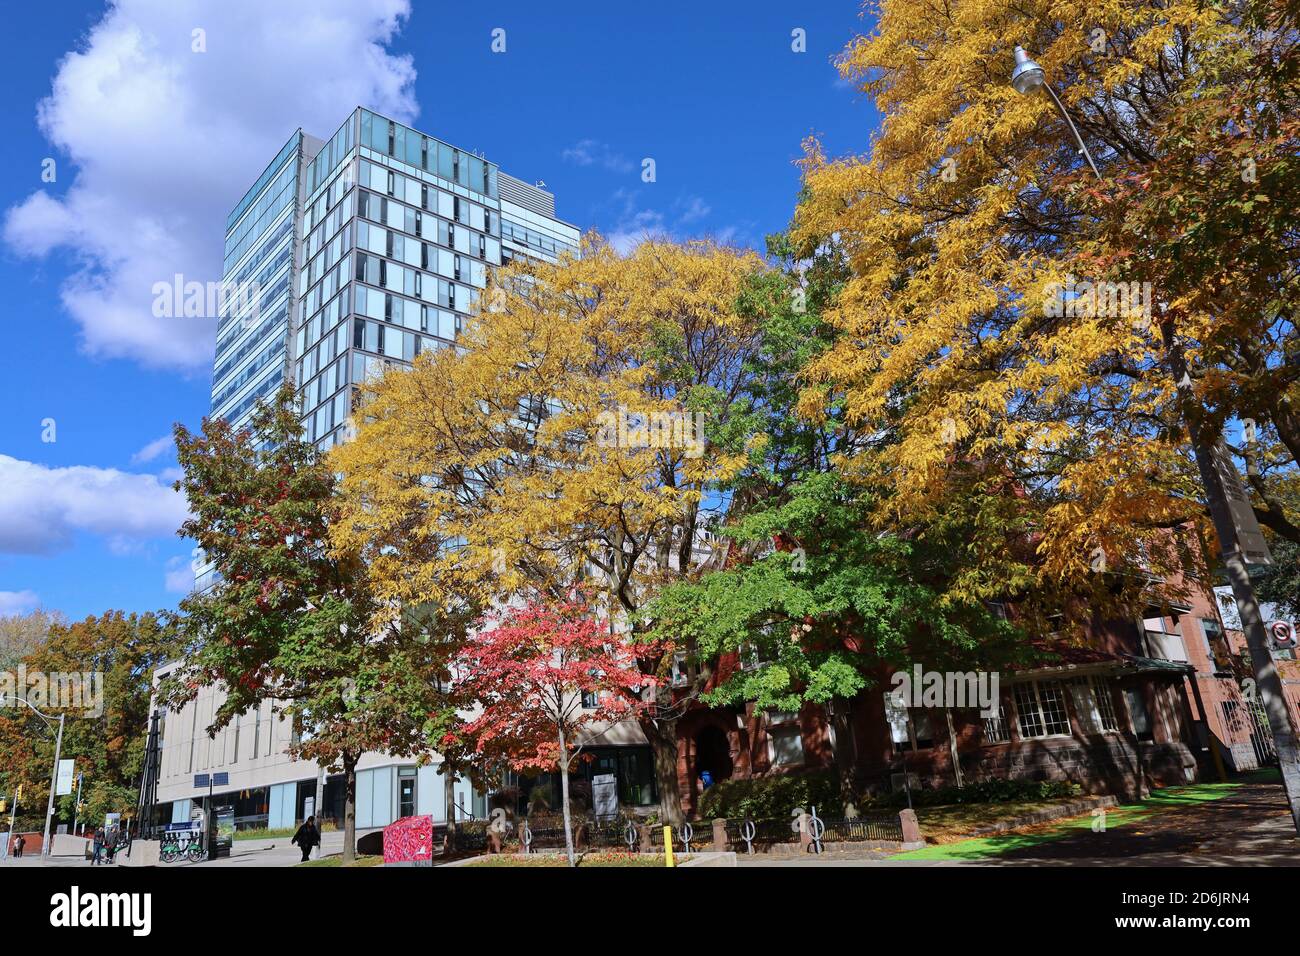 Toronto, Canada - October 16, 2020: University of Toronto campus, high rise building of the undergraduate business school, with trees in fall colors Stock Photo